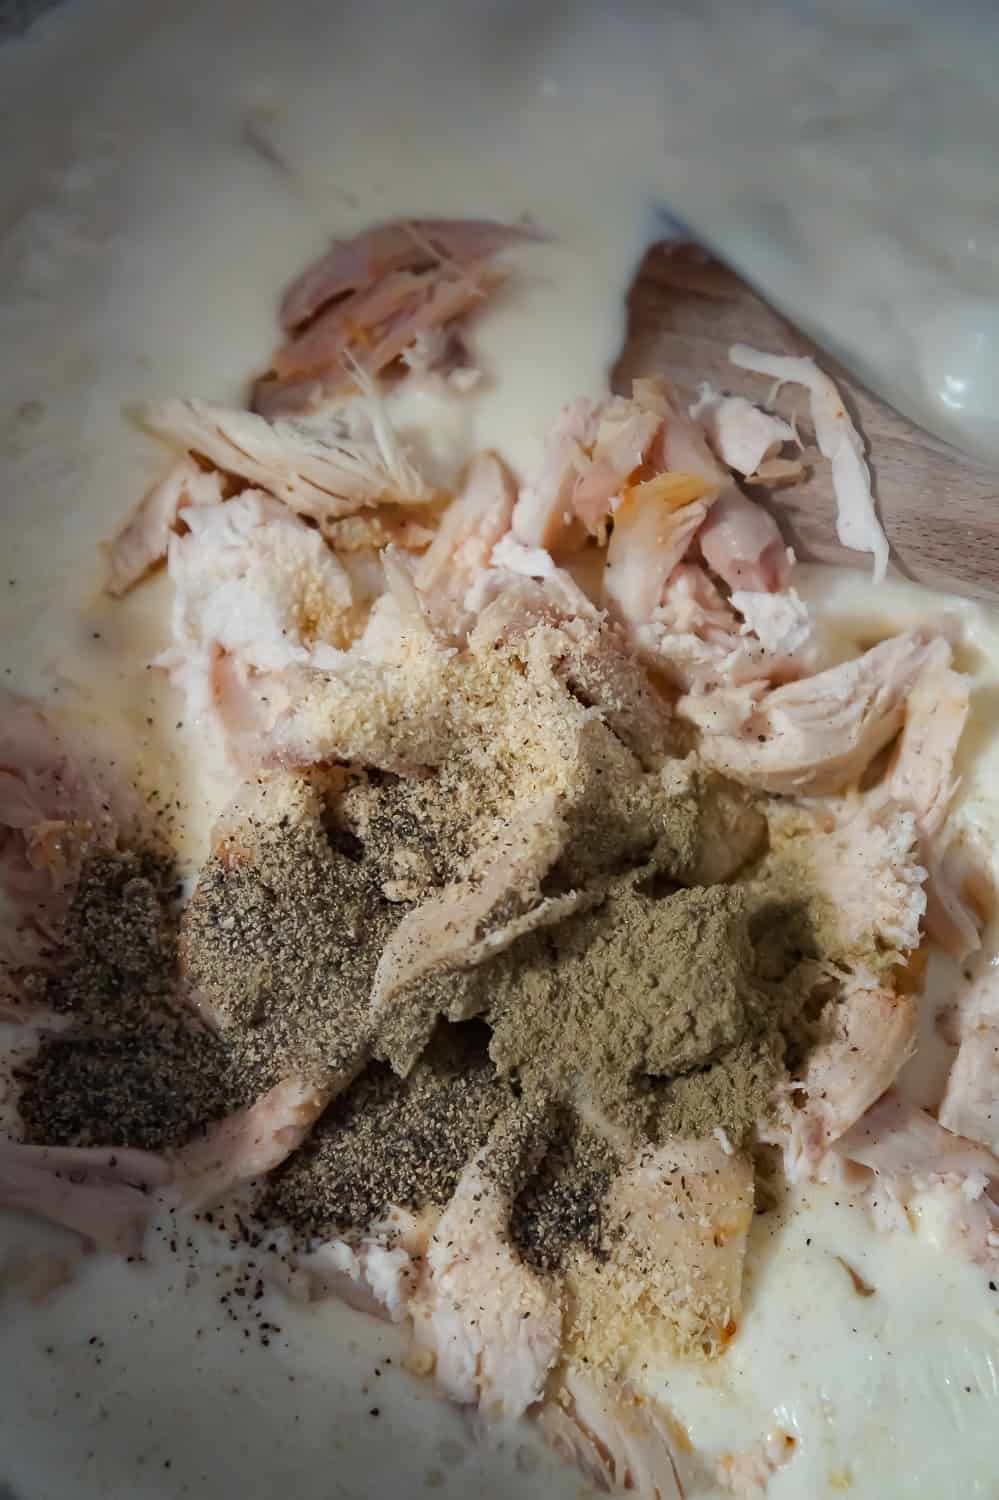 shredded chicken and spices added to a creamy sauce